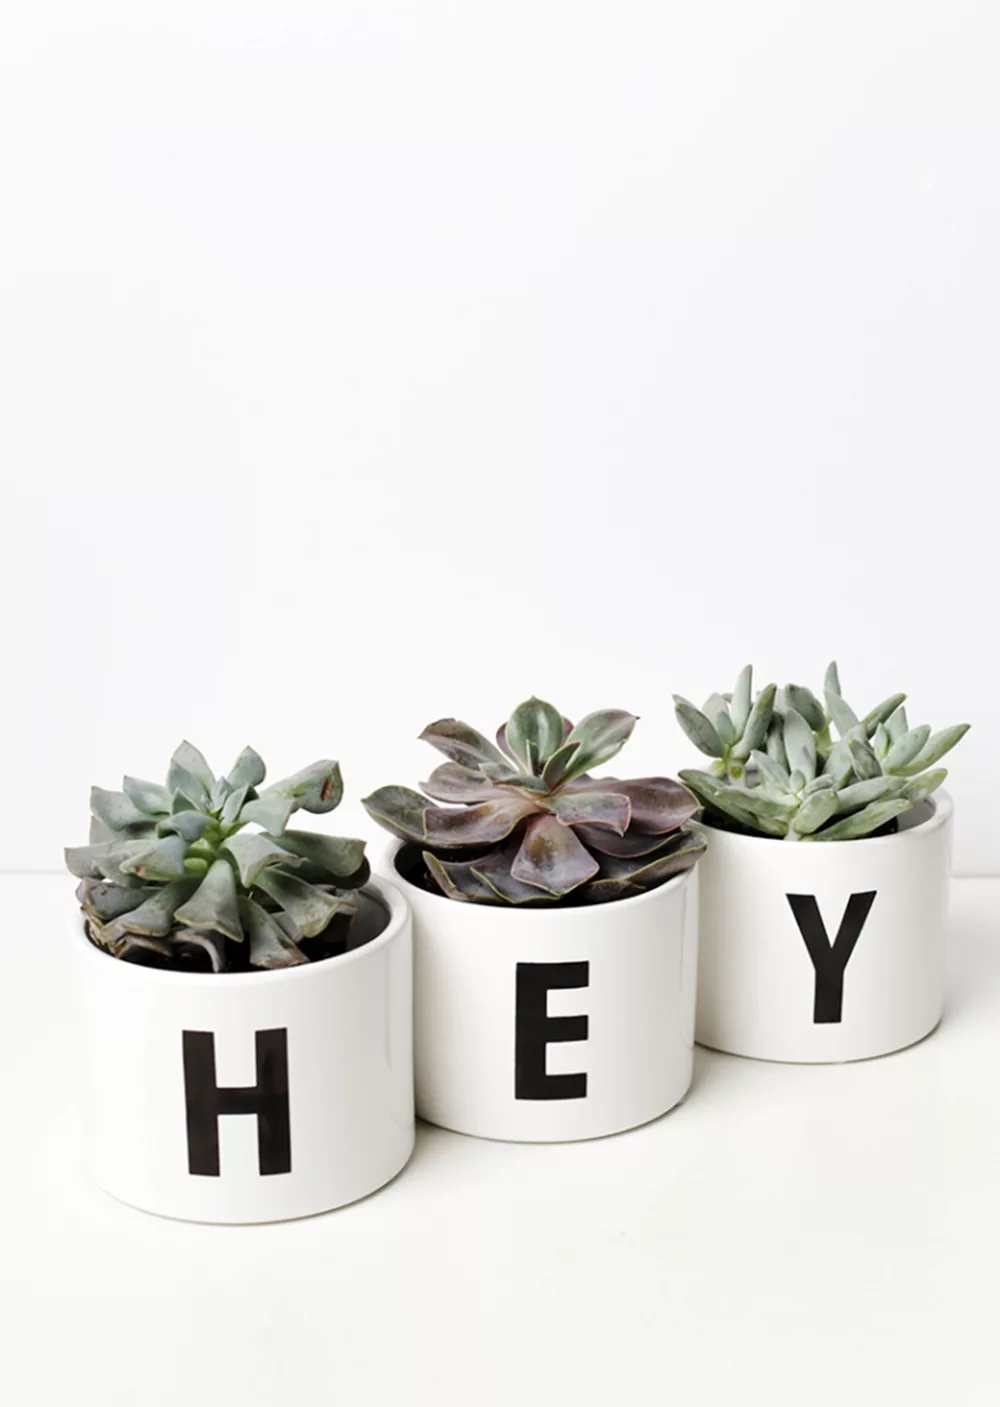 diy small planter with letters